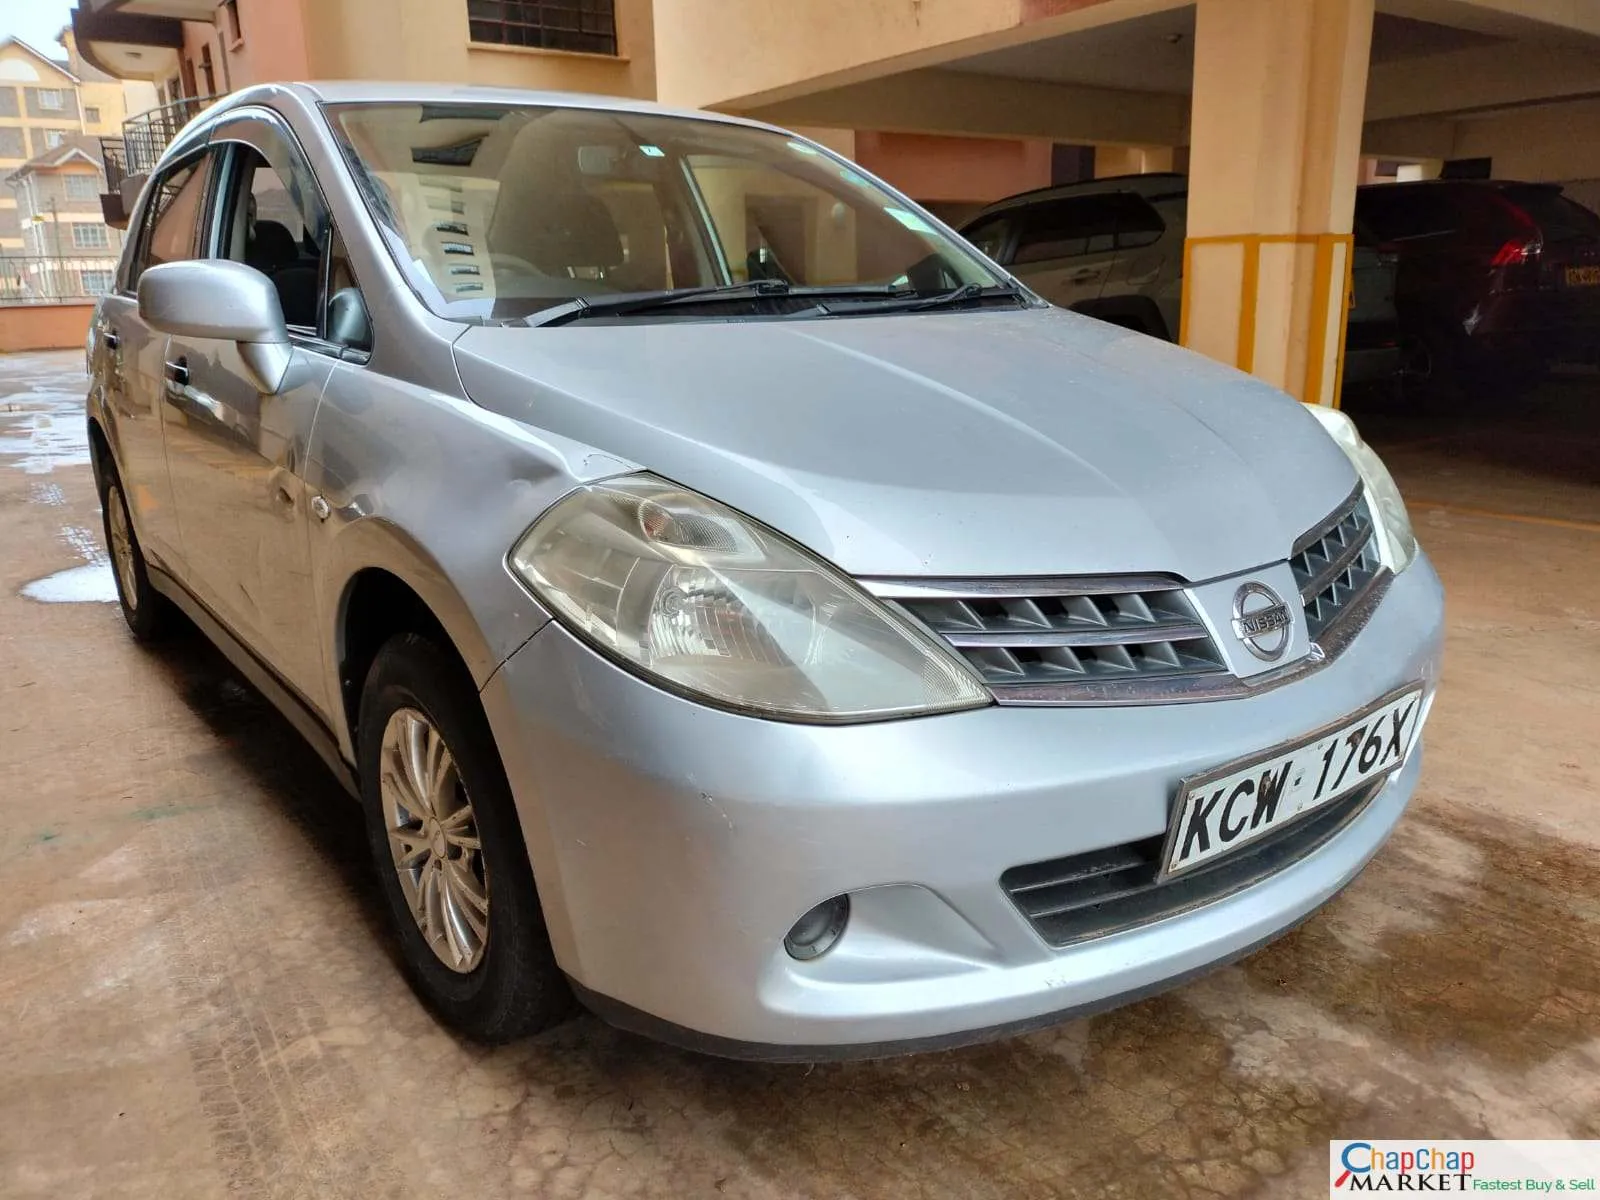 Cars Cars For Sale/Vehicles-Nissan Tiida QUICK SALE Pay 30% Deposit Trade in Ok EXCLUSIVE 9